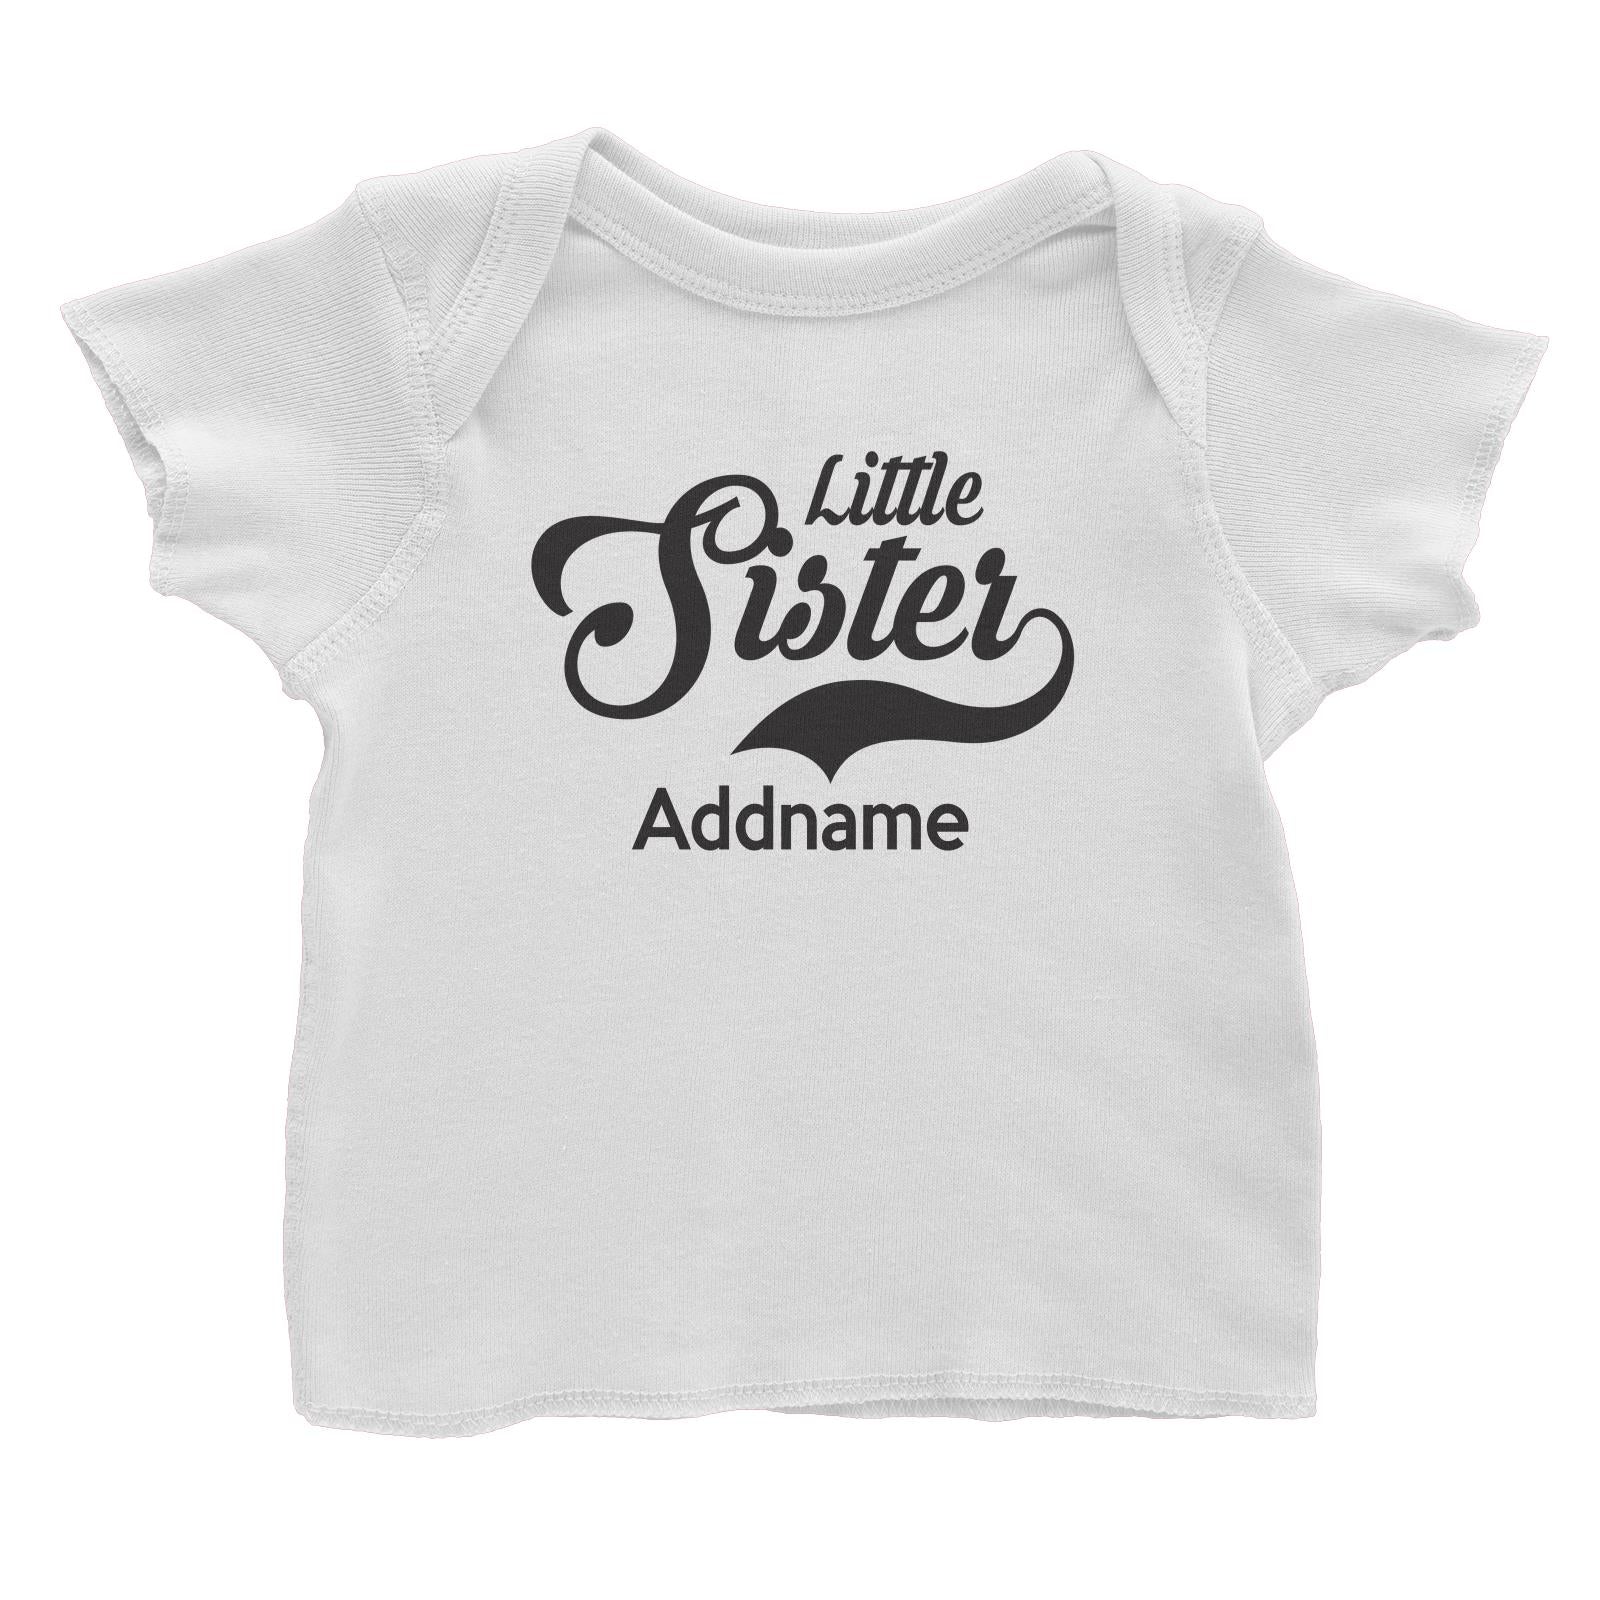 Retro Little Sister Addname Baby T-Shirt